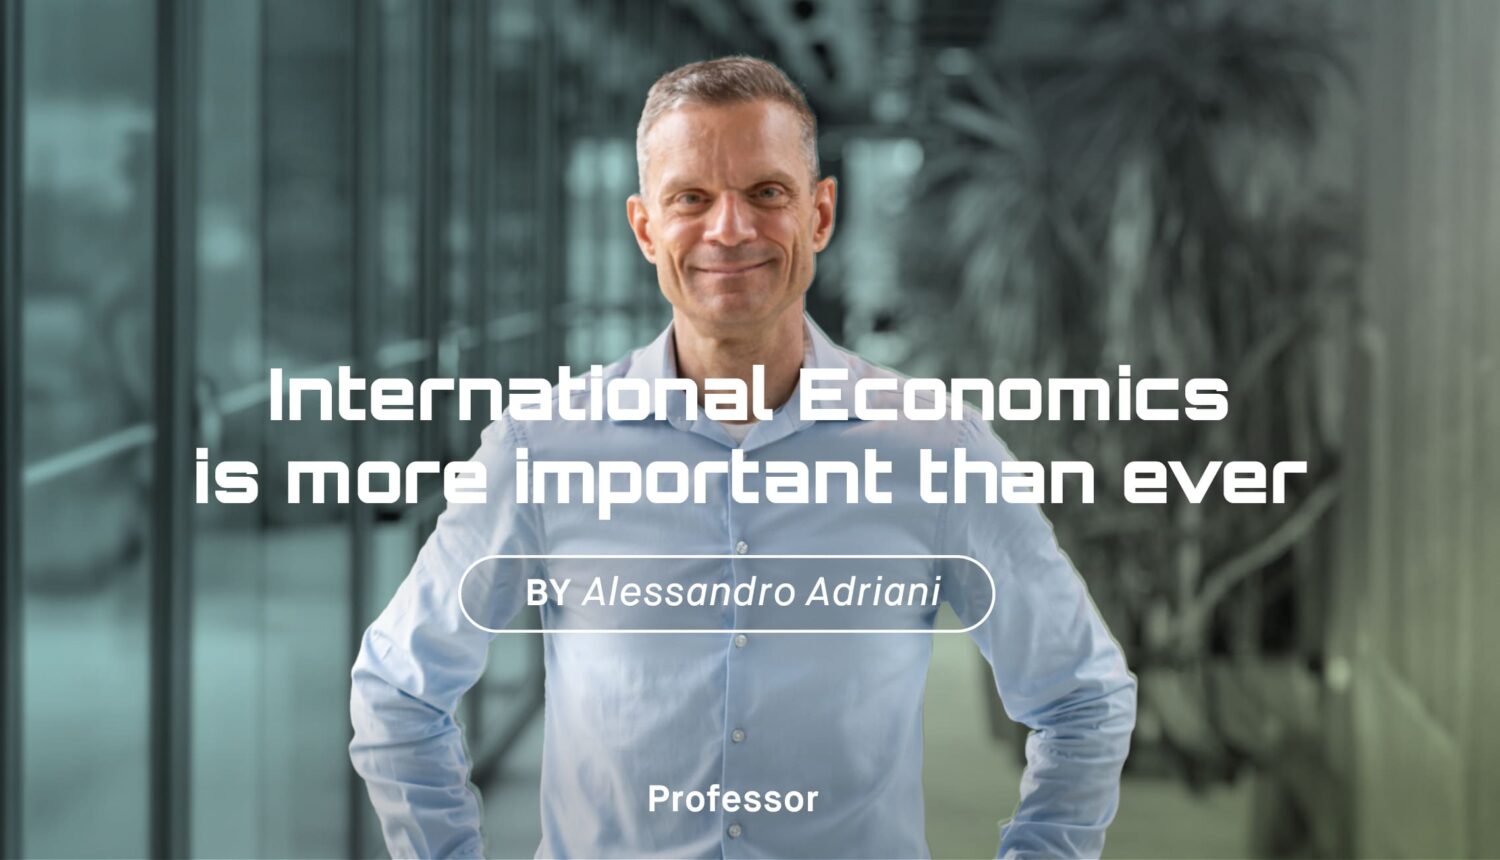 International Economics is more important than ever